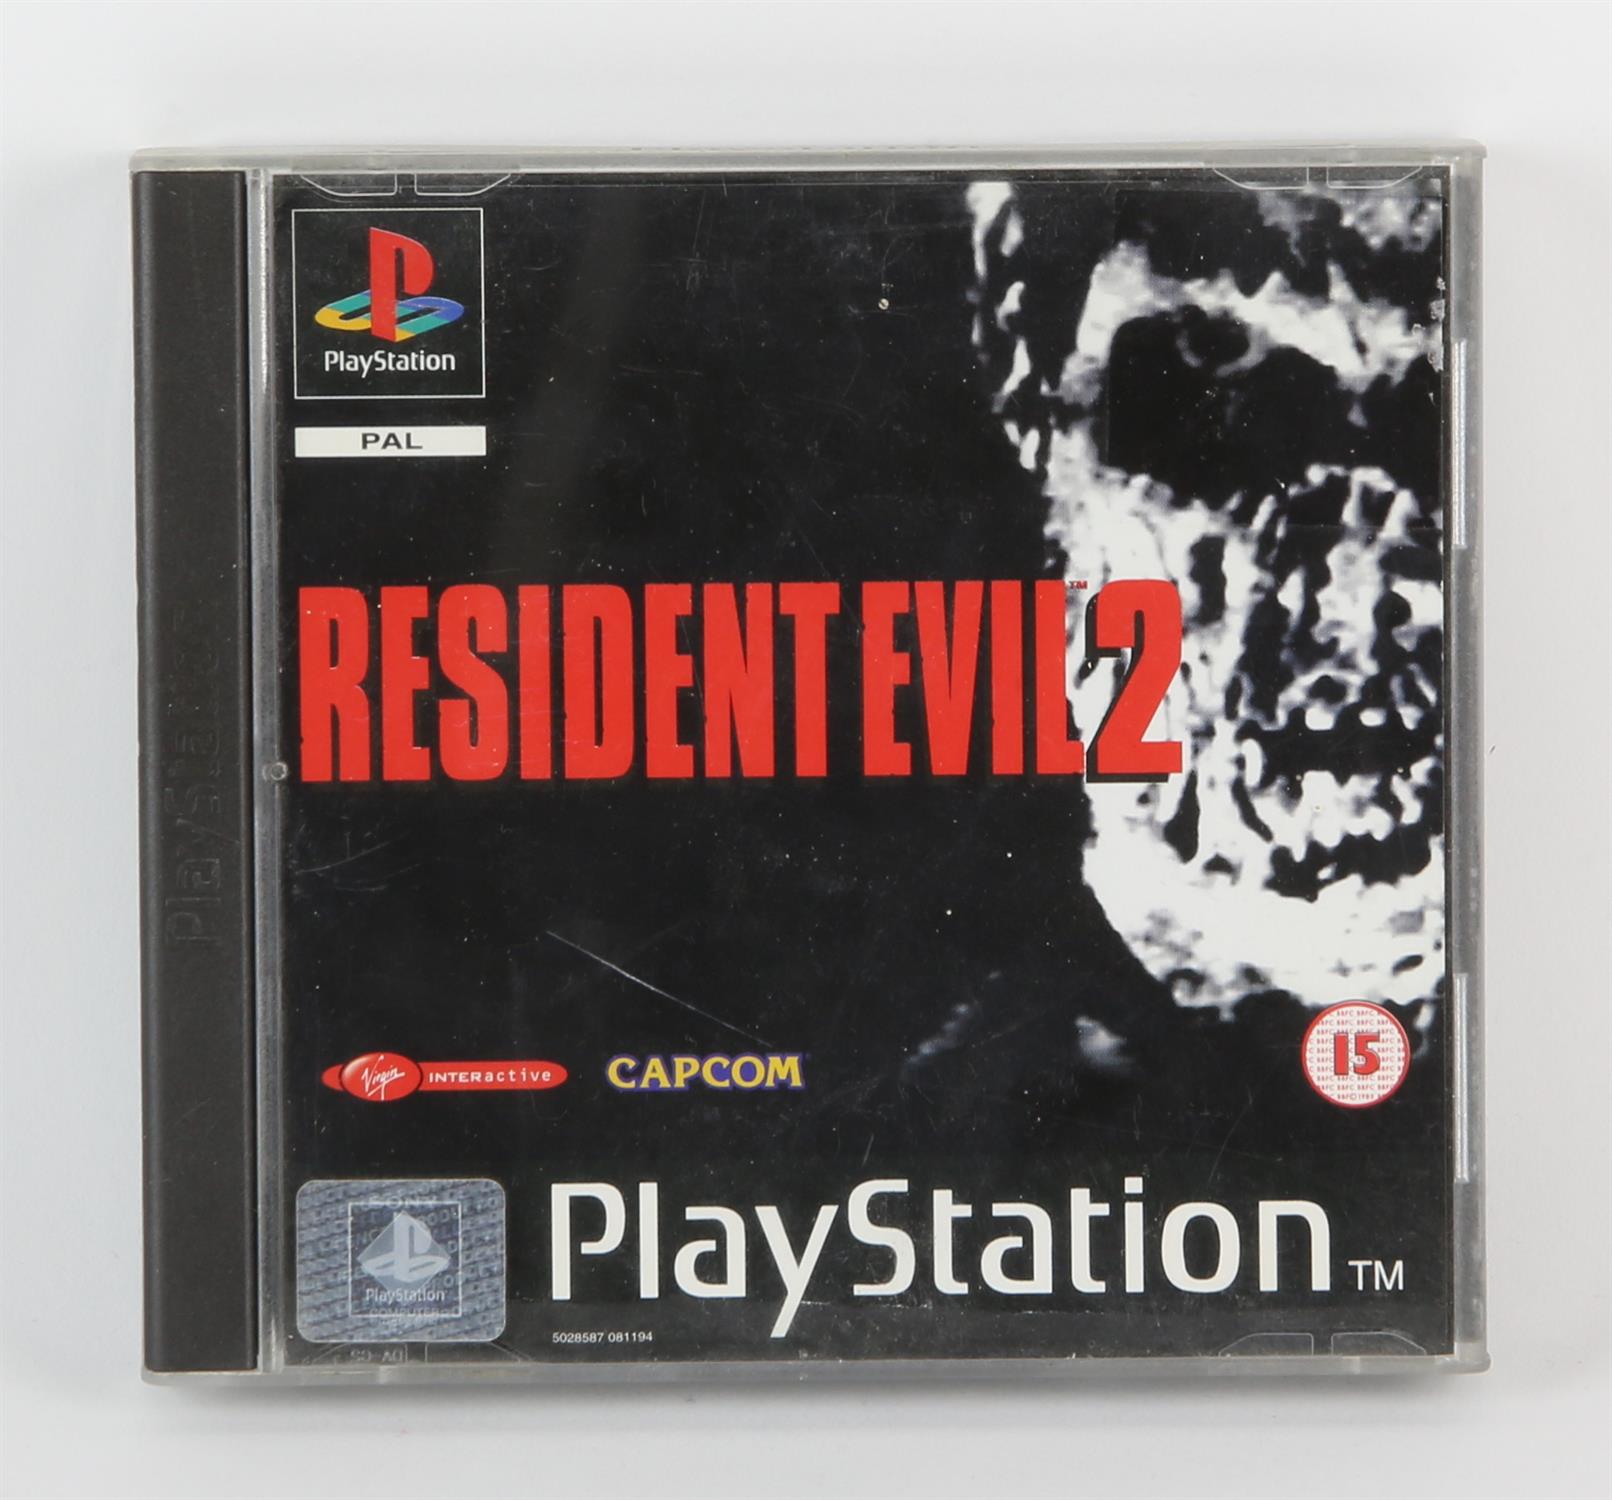 Resident Evil 2 PS1 boxed video game (PAL). PlayStation 1